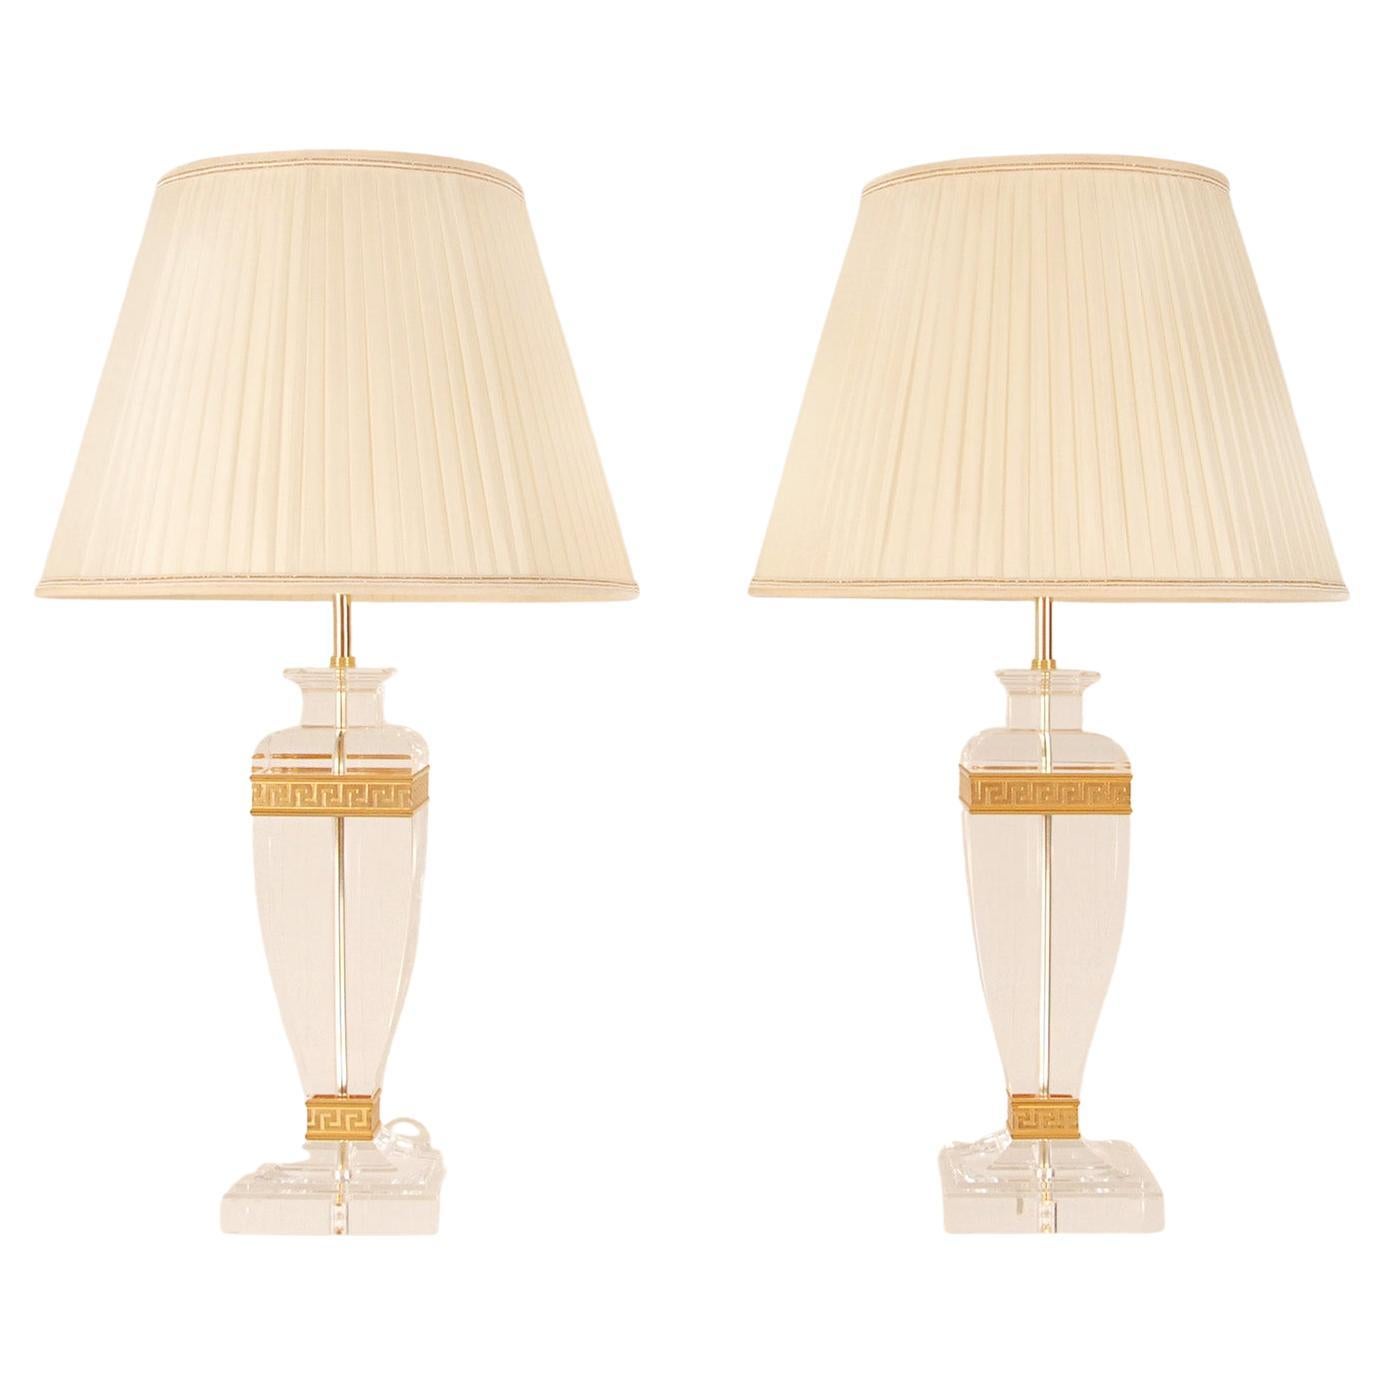 A pair tall Italian Versace style vase shaped table lamps
Made of gold gilded brass, bronze and acrylic
High end quality lamps
Colors: Gold and clear
Style midcentury Hollywood Regency, neoclassical, Charles Hollis Jones, Versace
Origin Italy